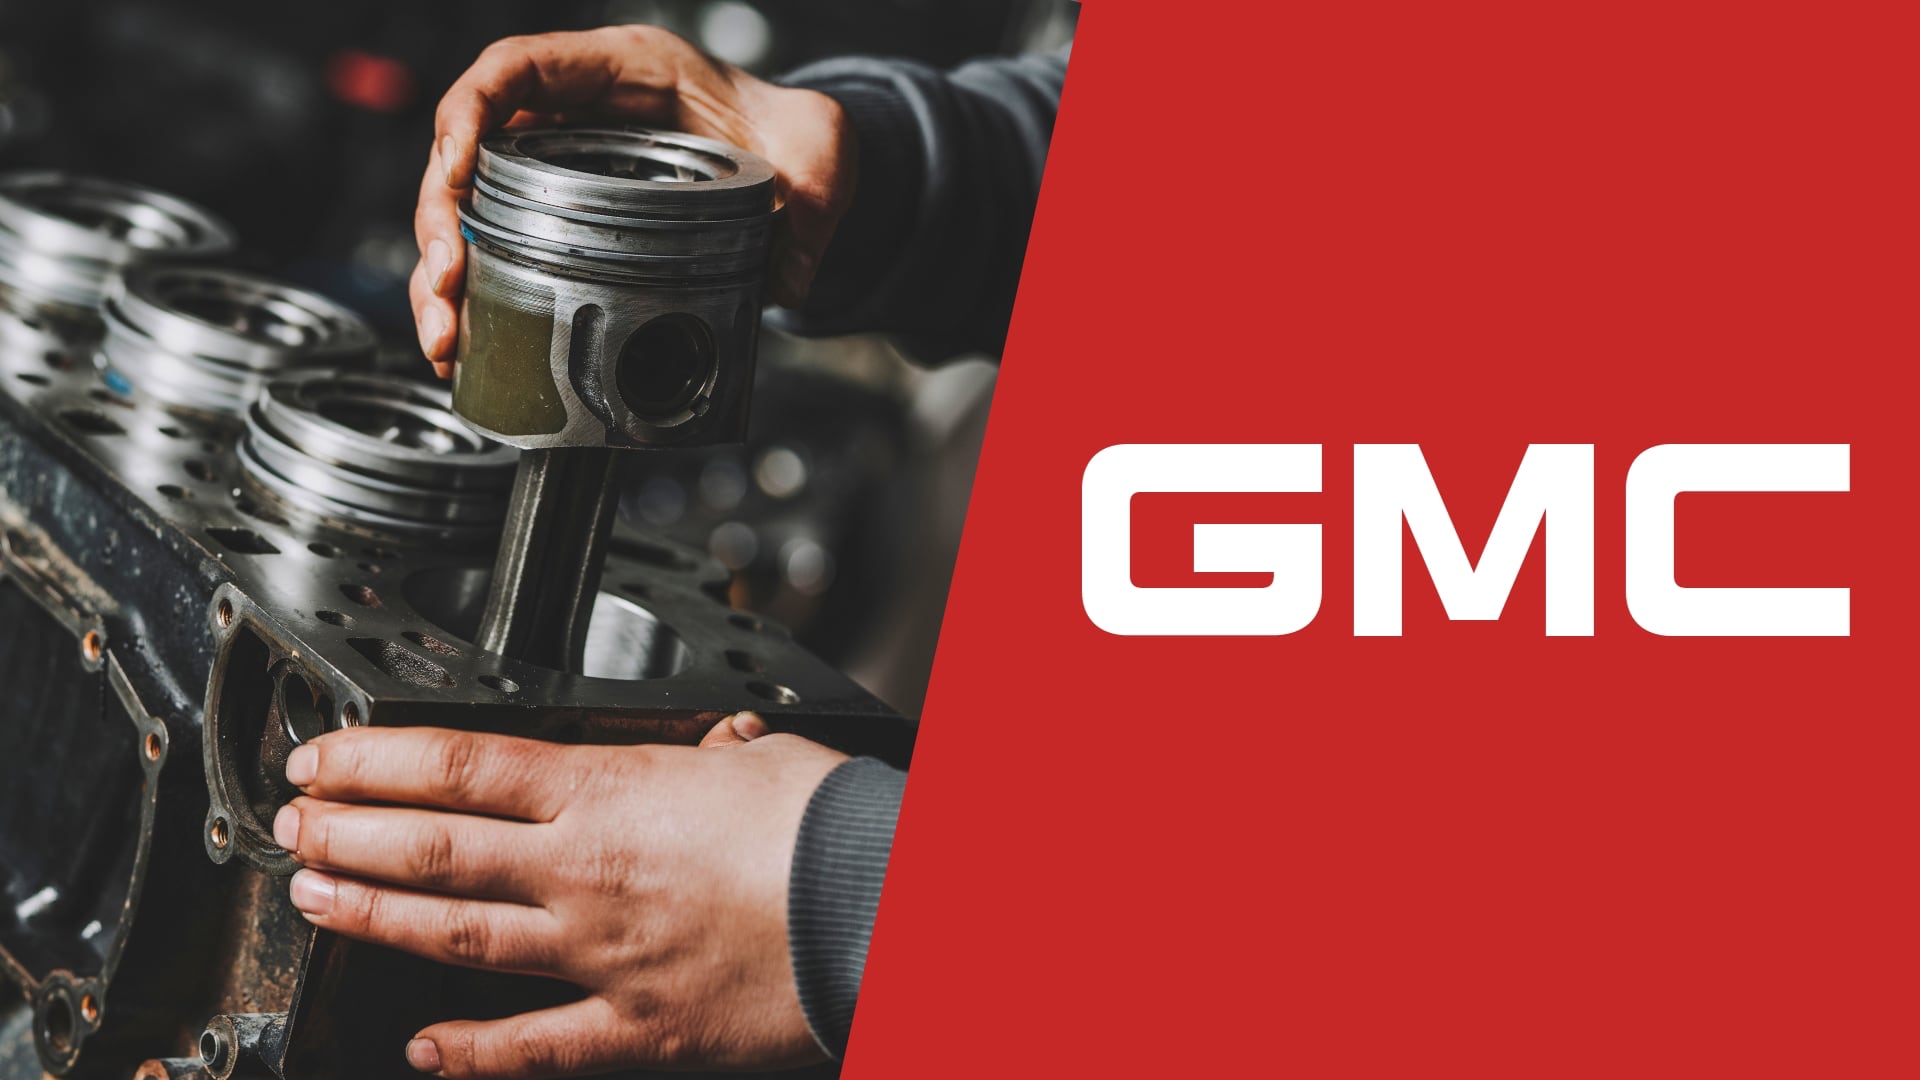 The gmc logo with a man working on a car engine.